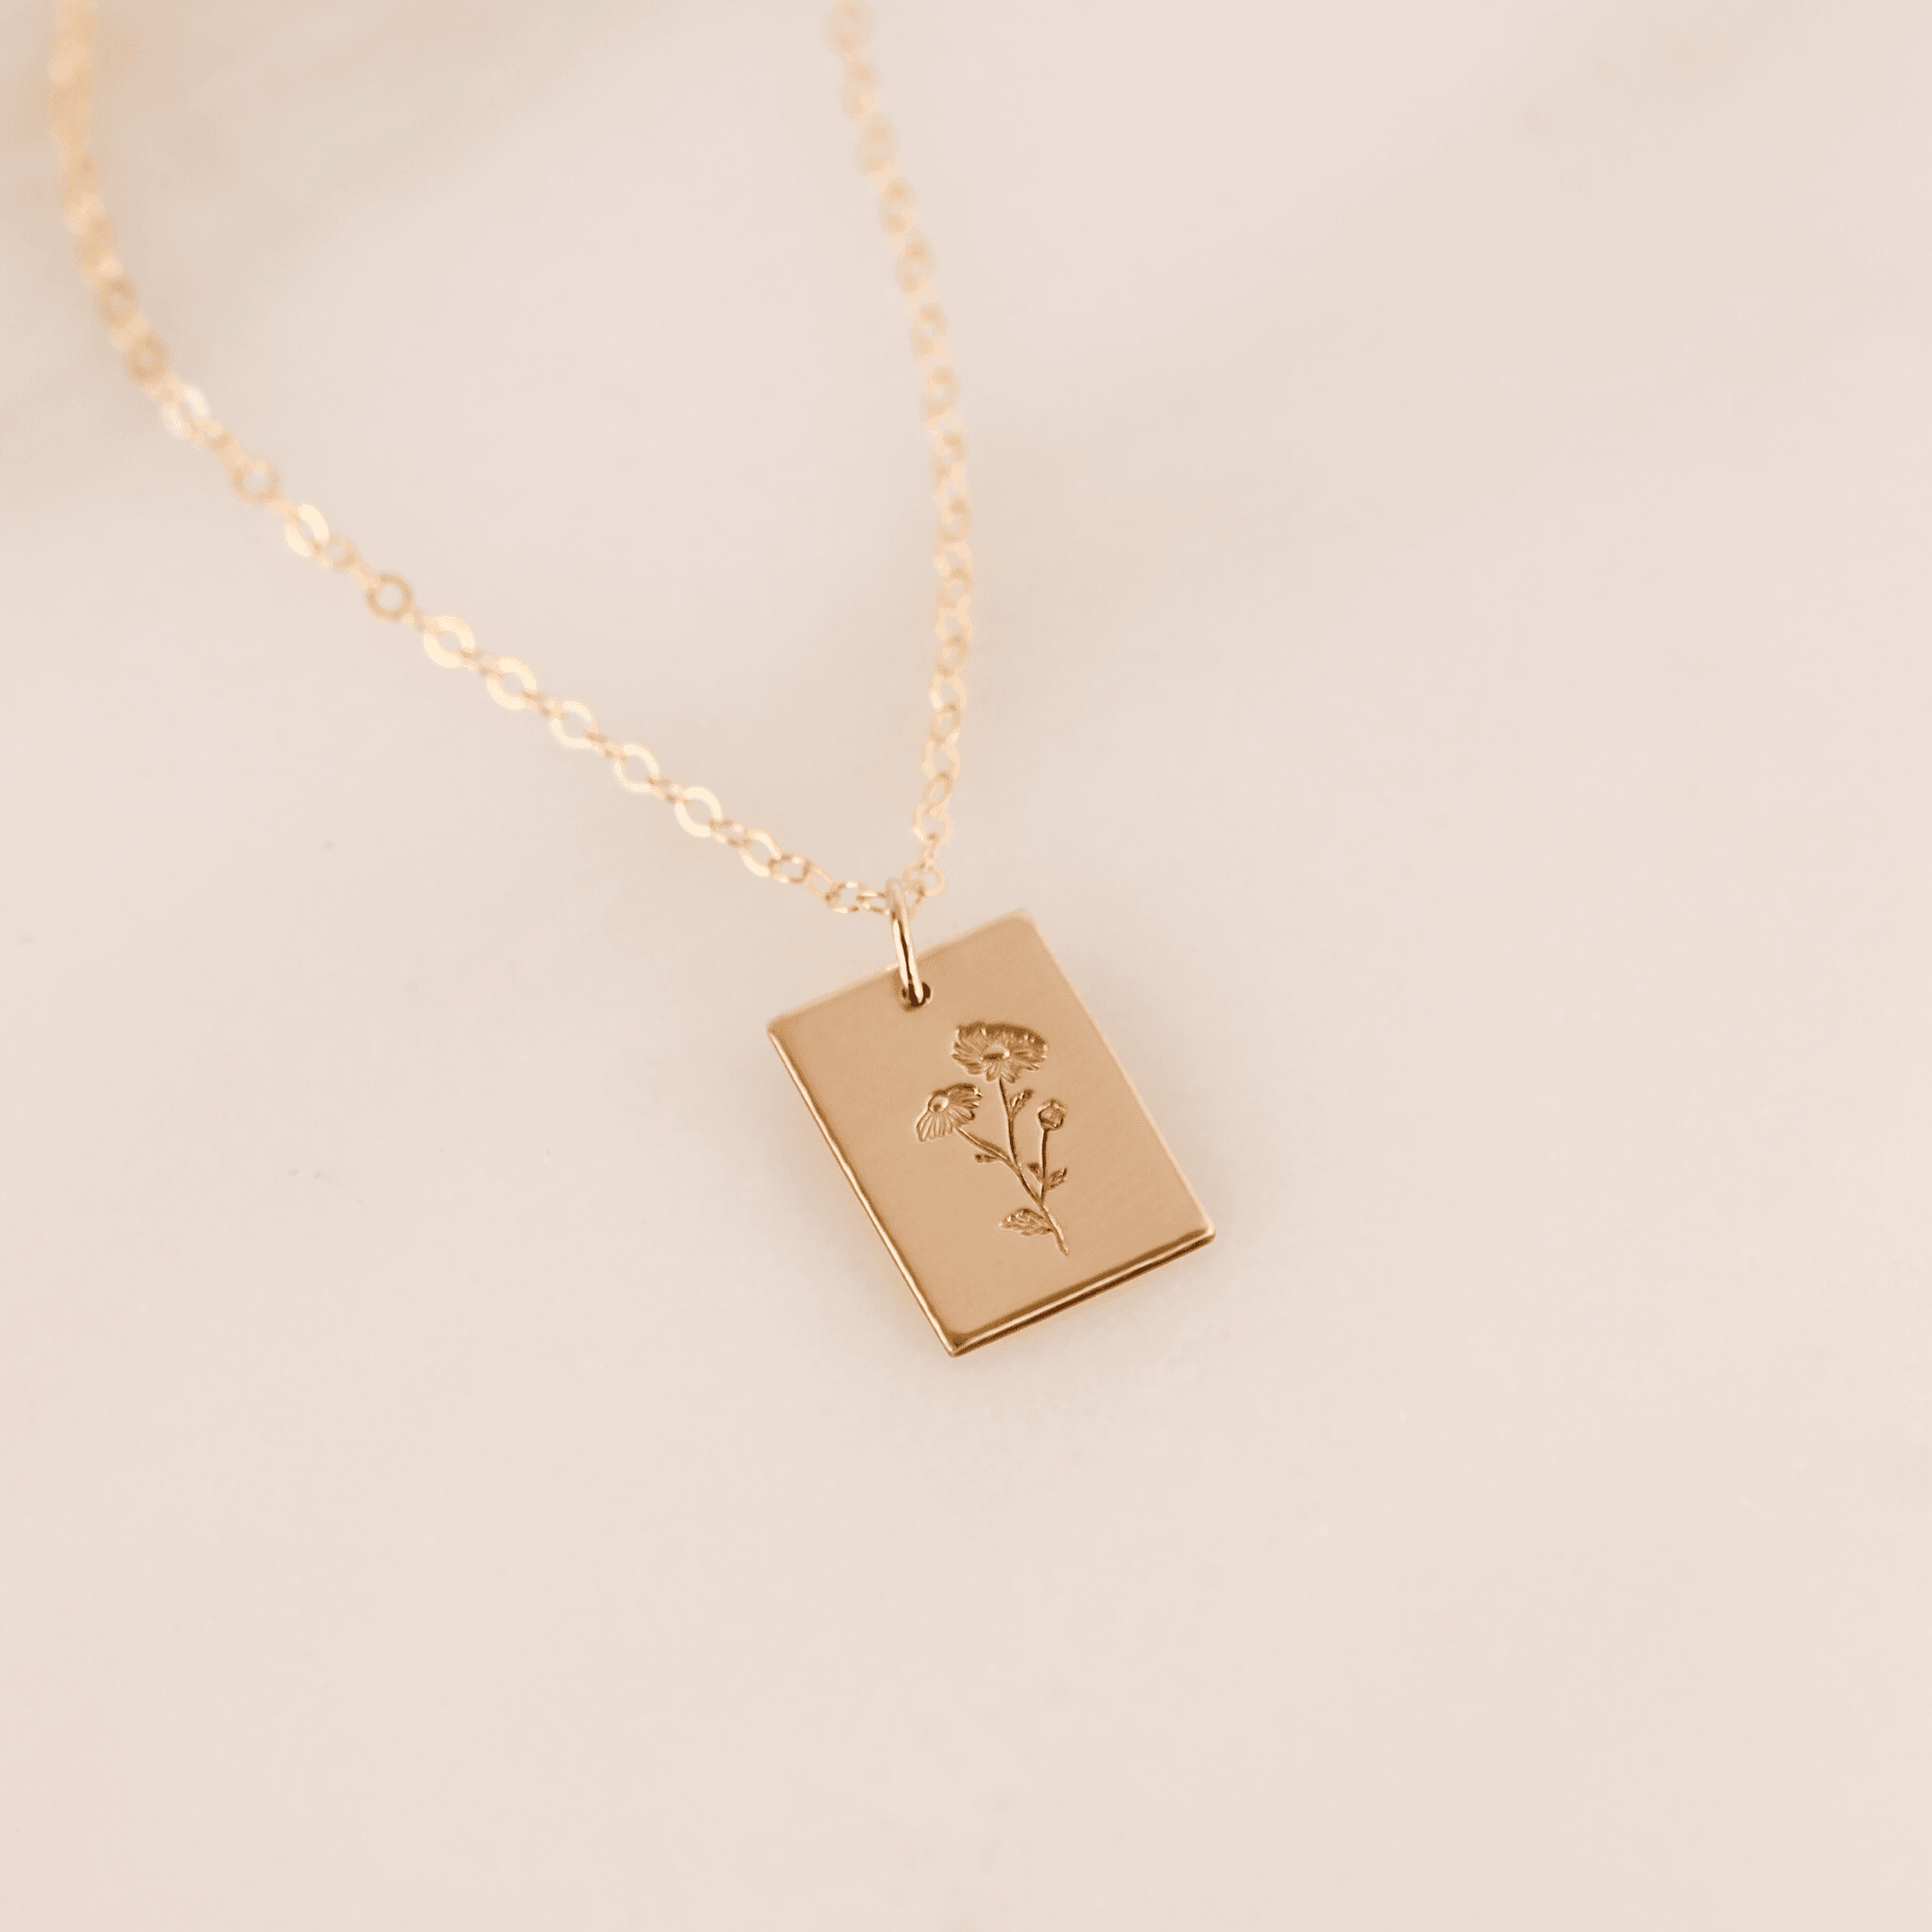 Clara Tag Necklace - Nolia Jewelry - Meaningful + Sustainably Handcrafted Jewelry